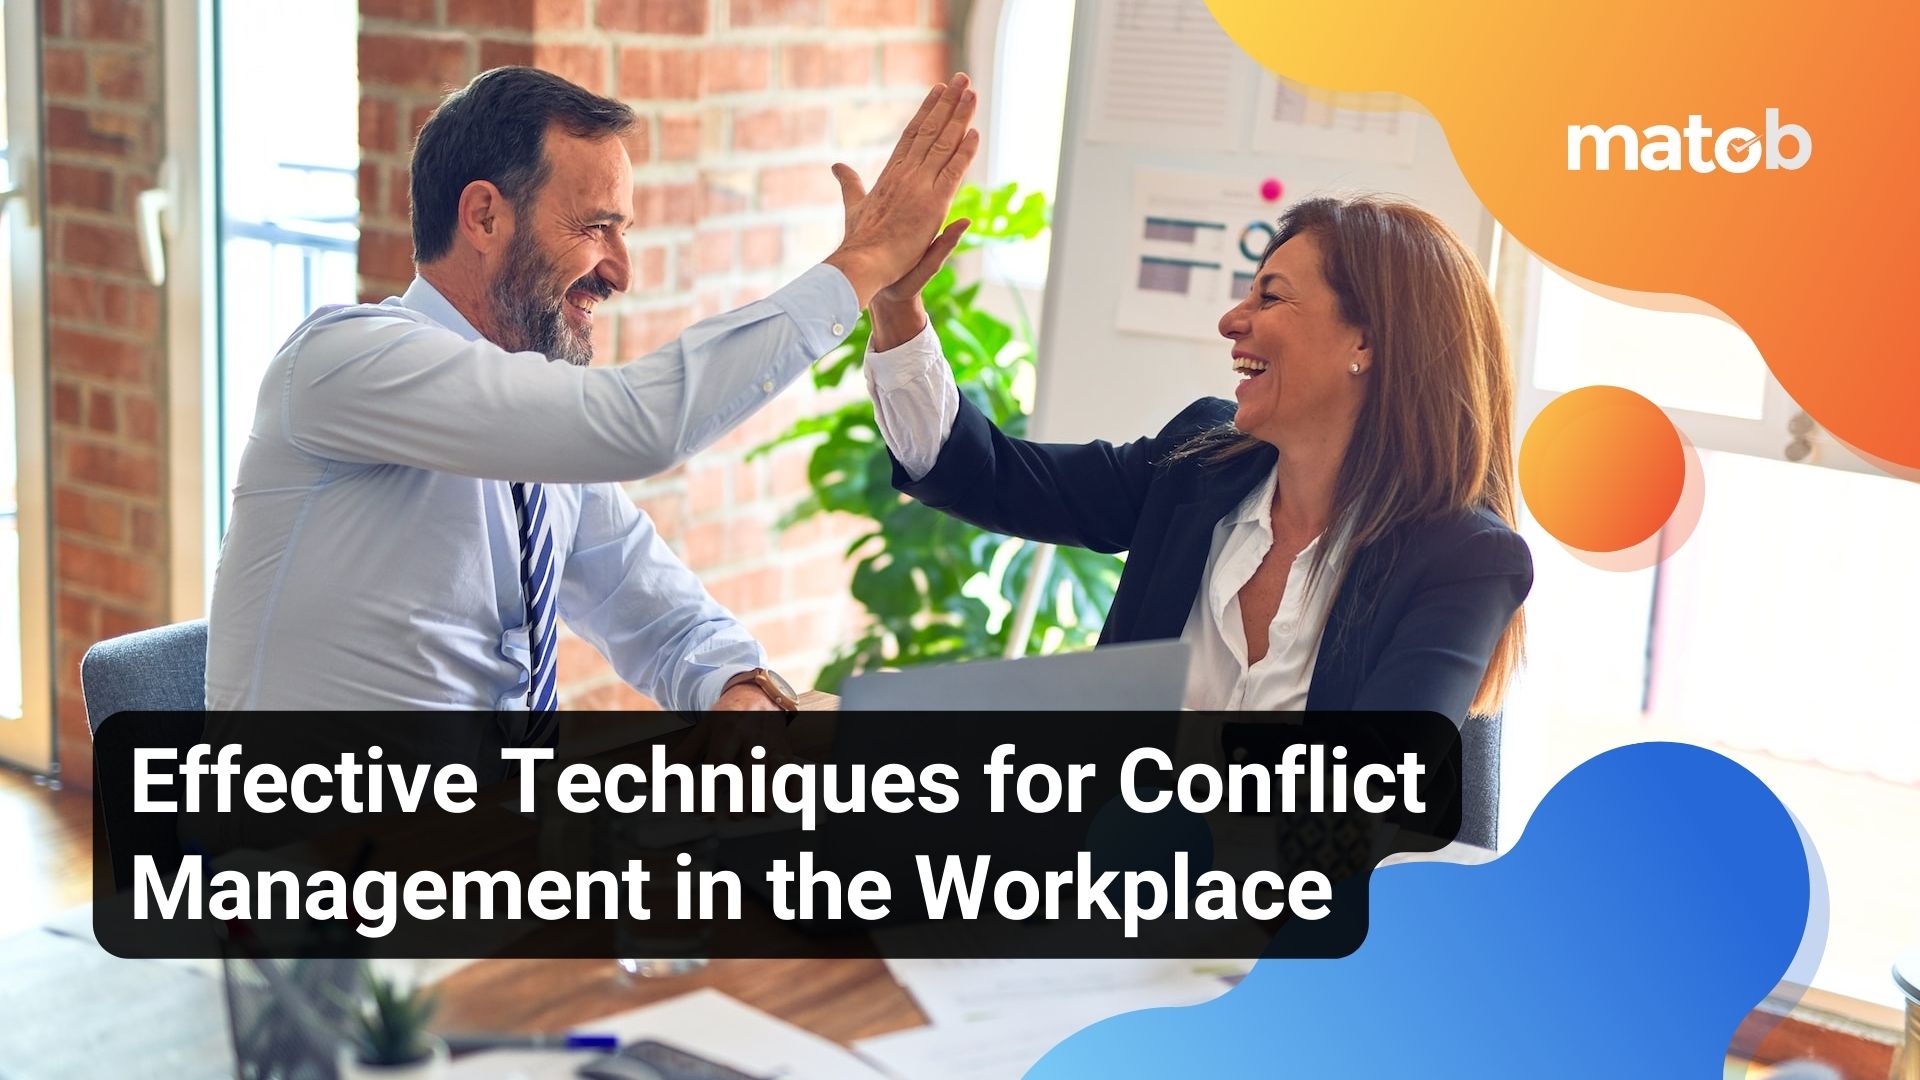 Effective Techniques for Conflict Management in the Workplace